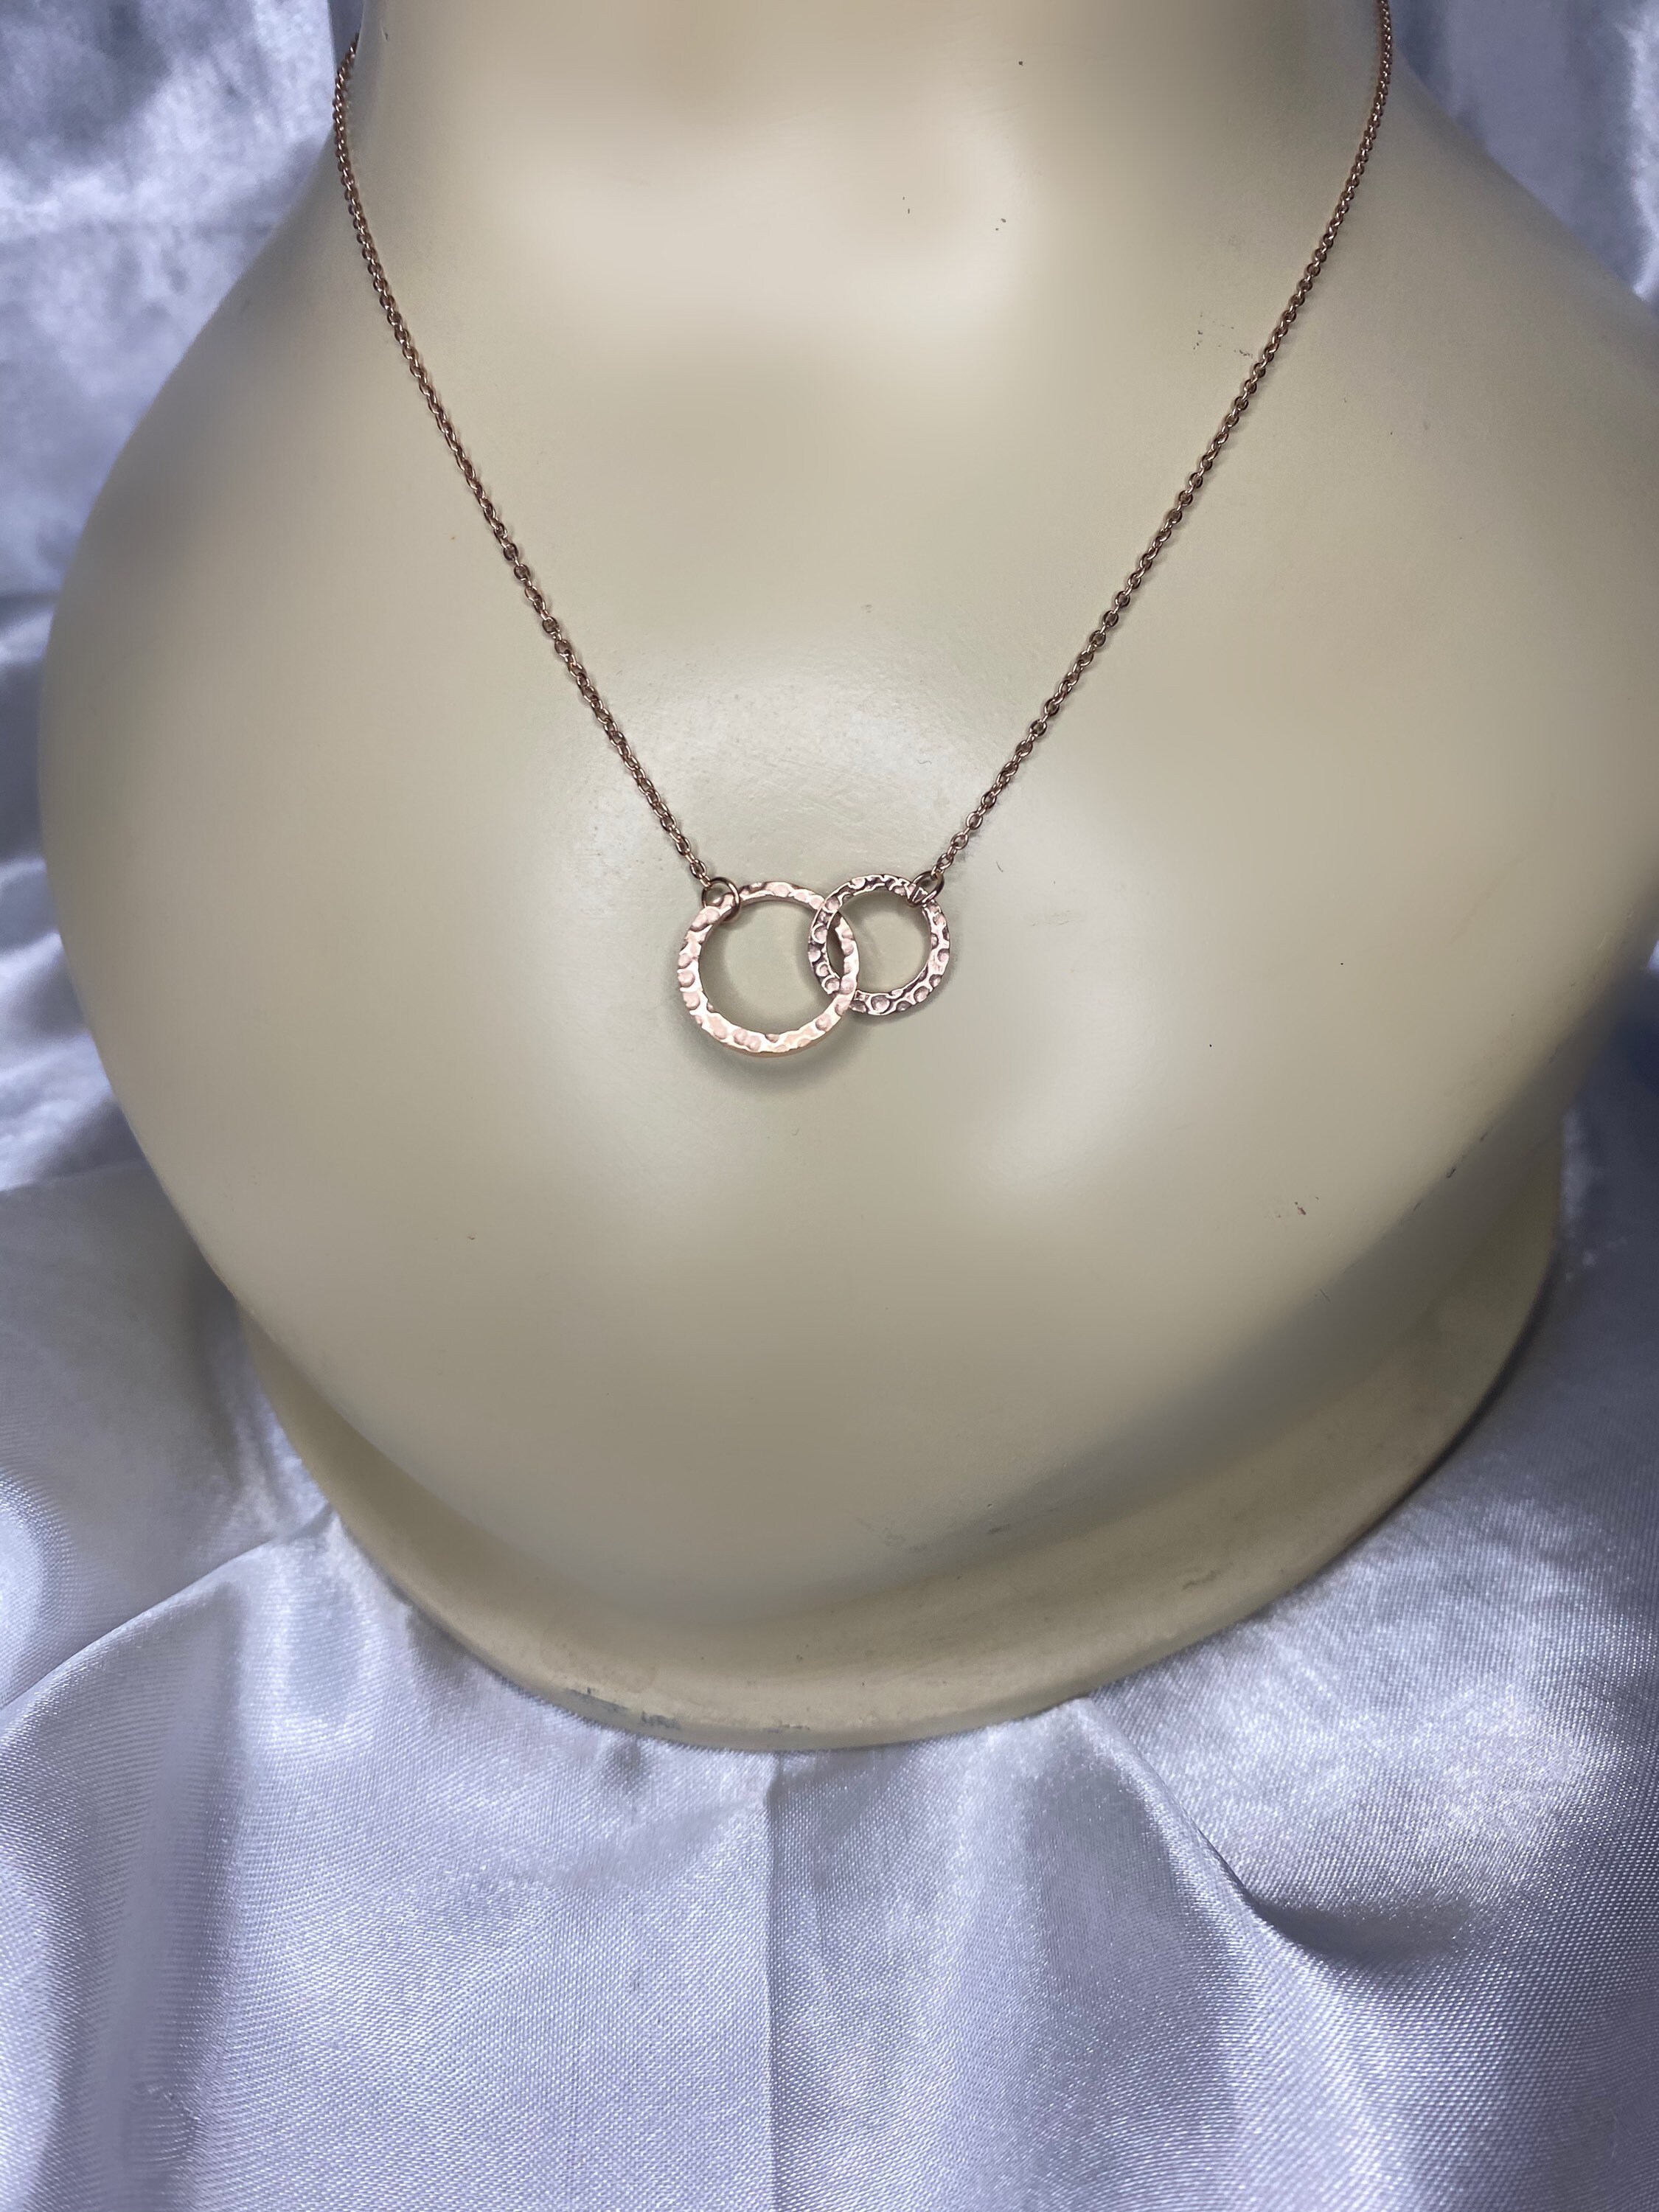 14k Gold Fill Circle Necklace Sterling Silver Linked Circle - Etsy UK